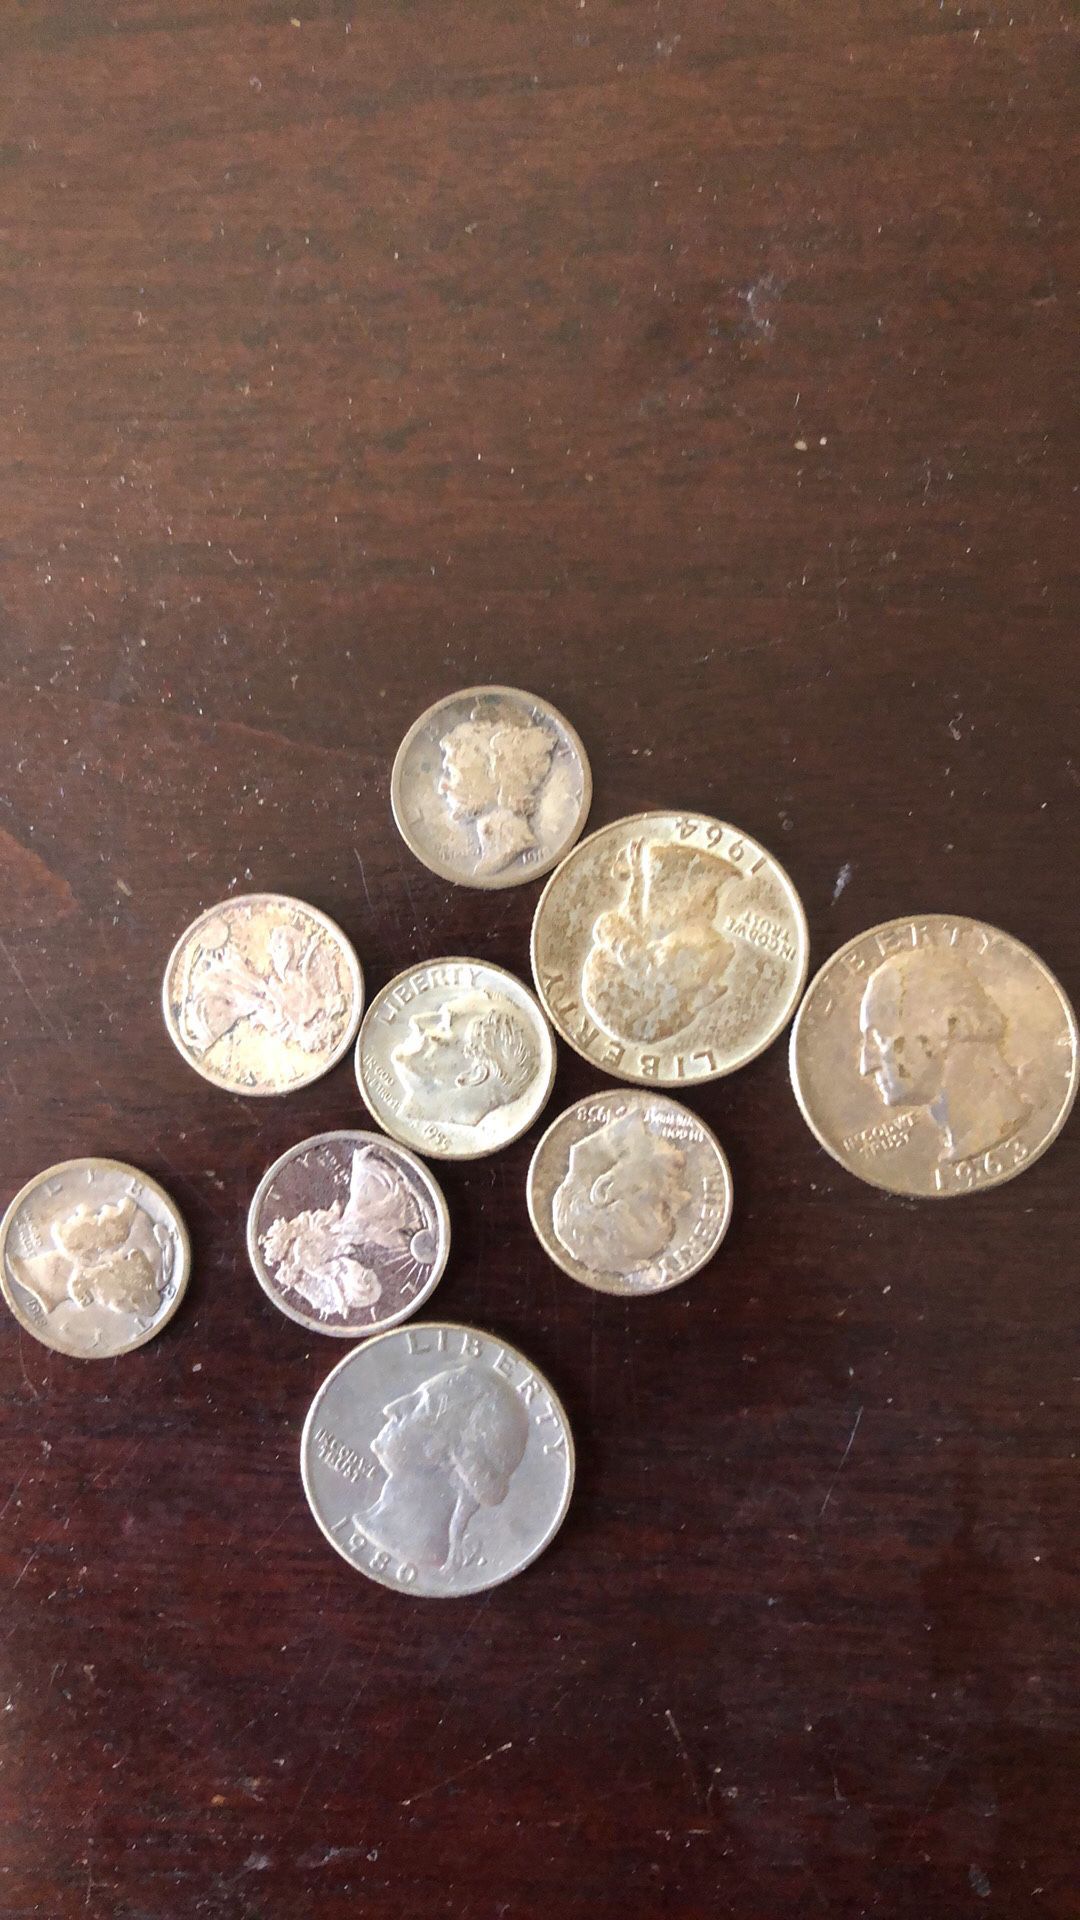 Lot of rare us antique silver coins